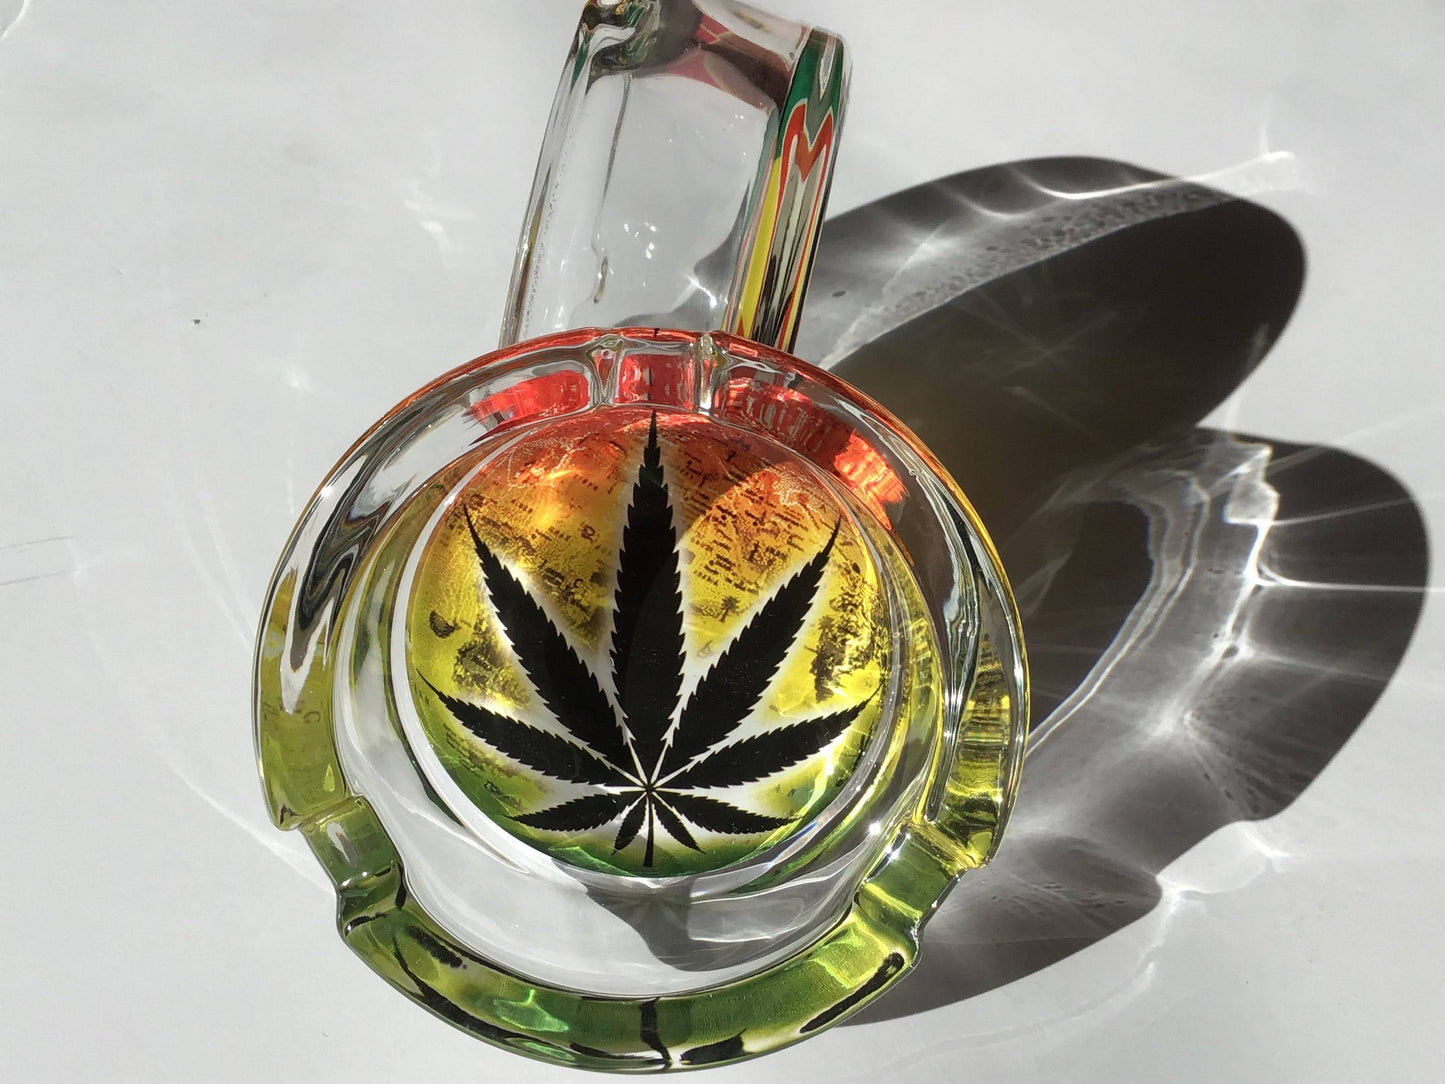 Highest Quality Canna Leaf Design Durable Glass Ashtray yoga smokes yoga studio, delivery, delivery near me, yoga smokes smoke shop, find smoke shop, head shop near me, yoga studio, headshop, head shop, local smoke shop, psl, psl smoke shop, smoke shop, smokeshop, yoga, yoga studio, dispensary, local dispensary, smokeshop near me, port saint lucie, florida, port st lucie, lounge, life, highlife, love, stoned, highsociety. Yoga Smokes